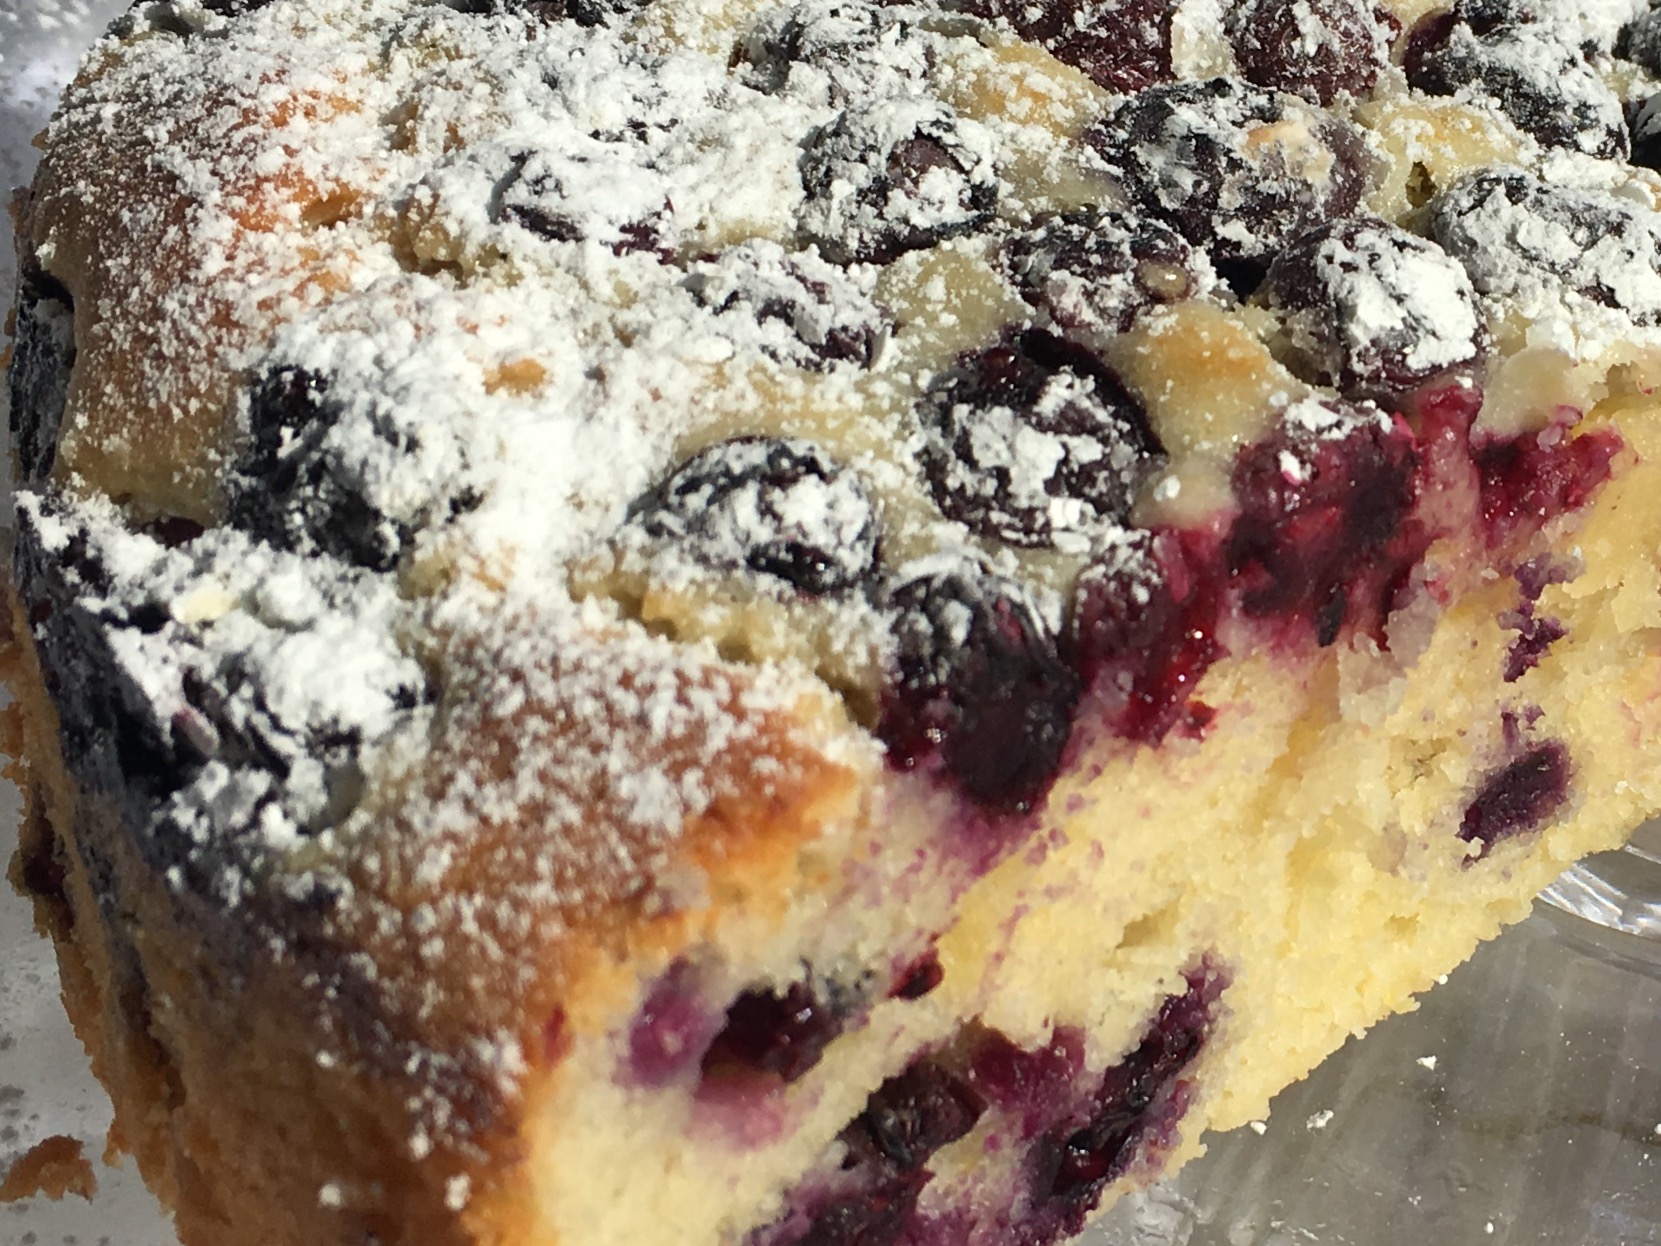 Homemade Blueberry cake with powdered sugar on top